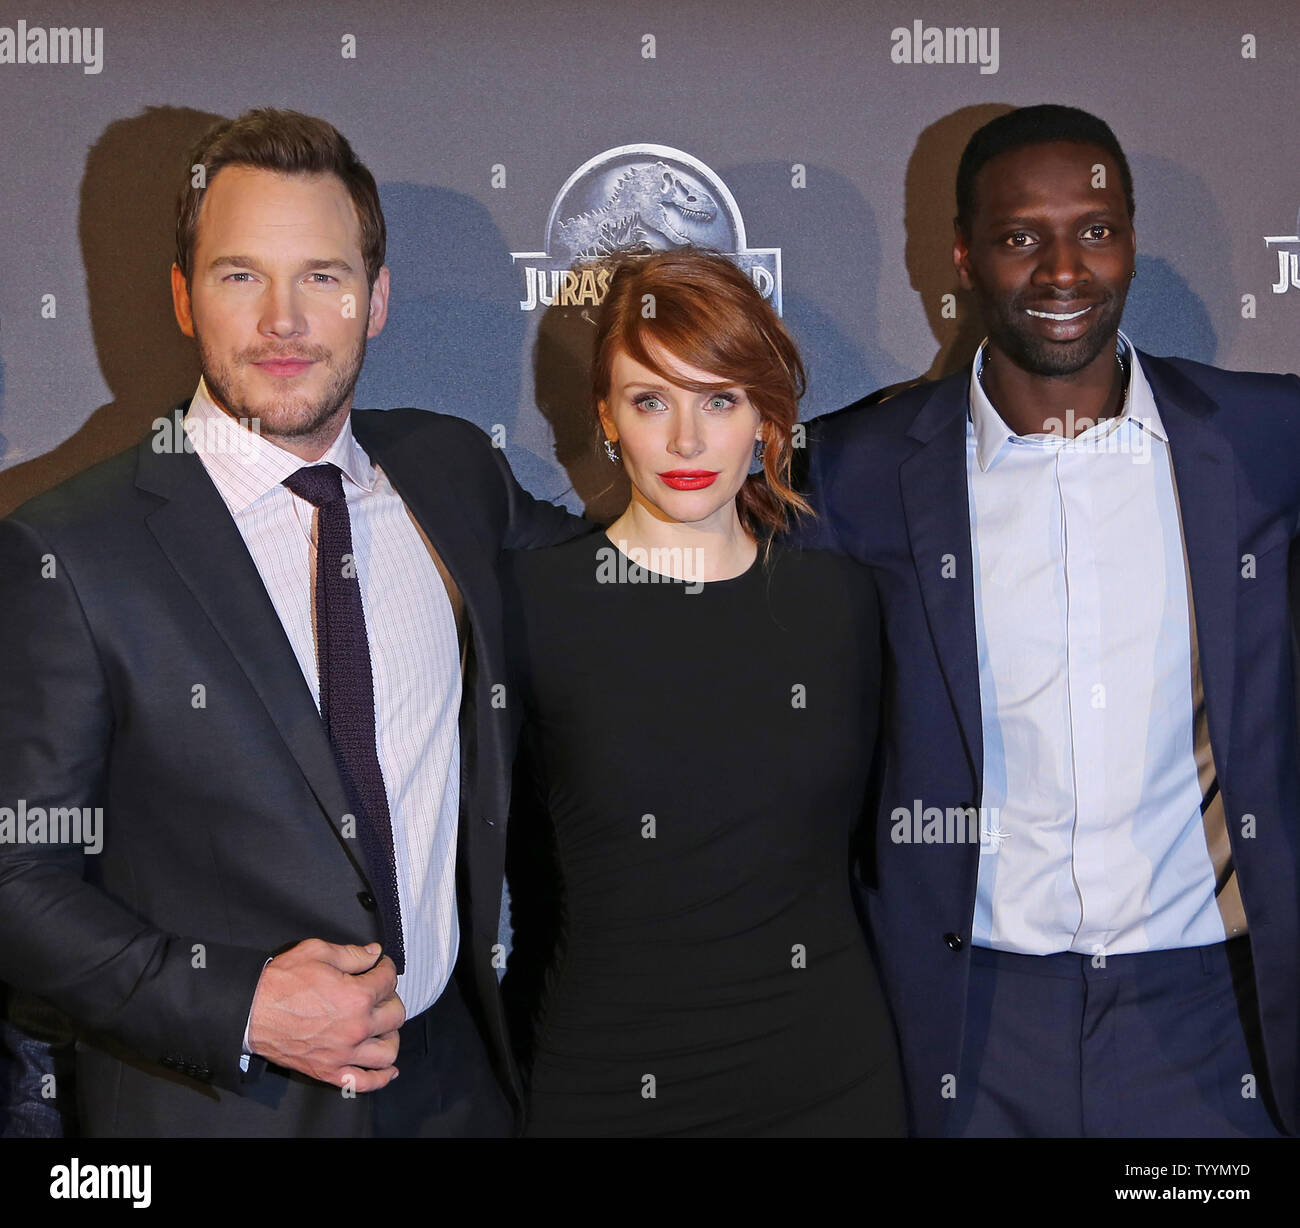 Chris Pratt (L), Bryce Dallas Howard (C) and Omar Sy arrive at the world premiere of the film 'Jurassic World' in Paris on May 29, 2014.   Photo by David Silpa/UPI. Stock Photo